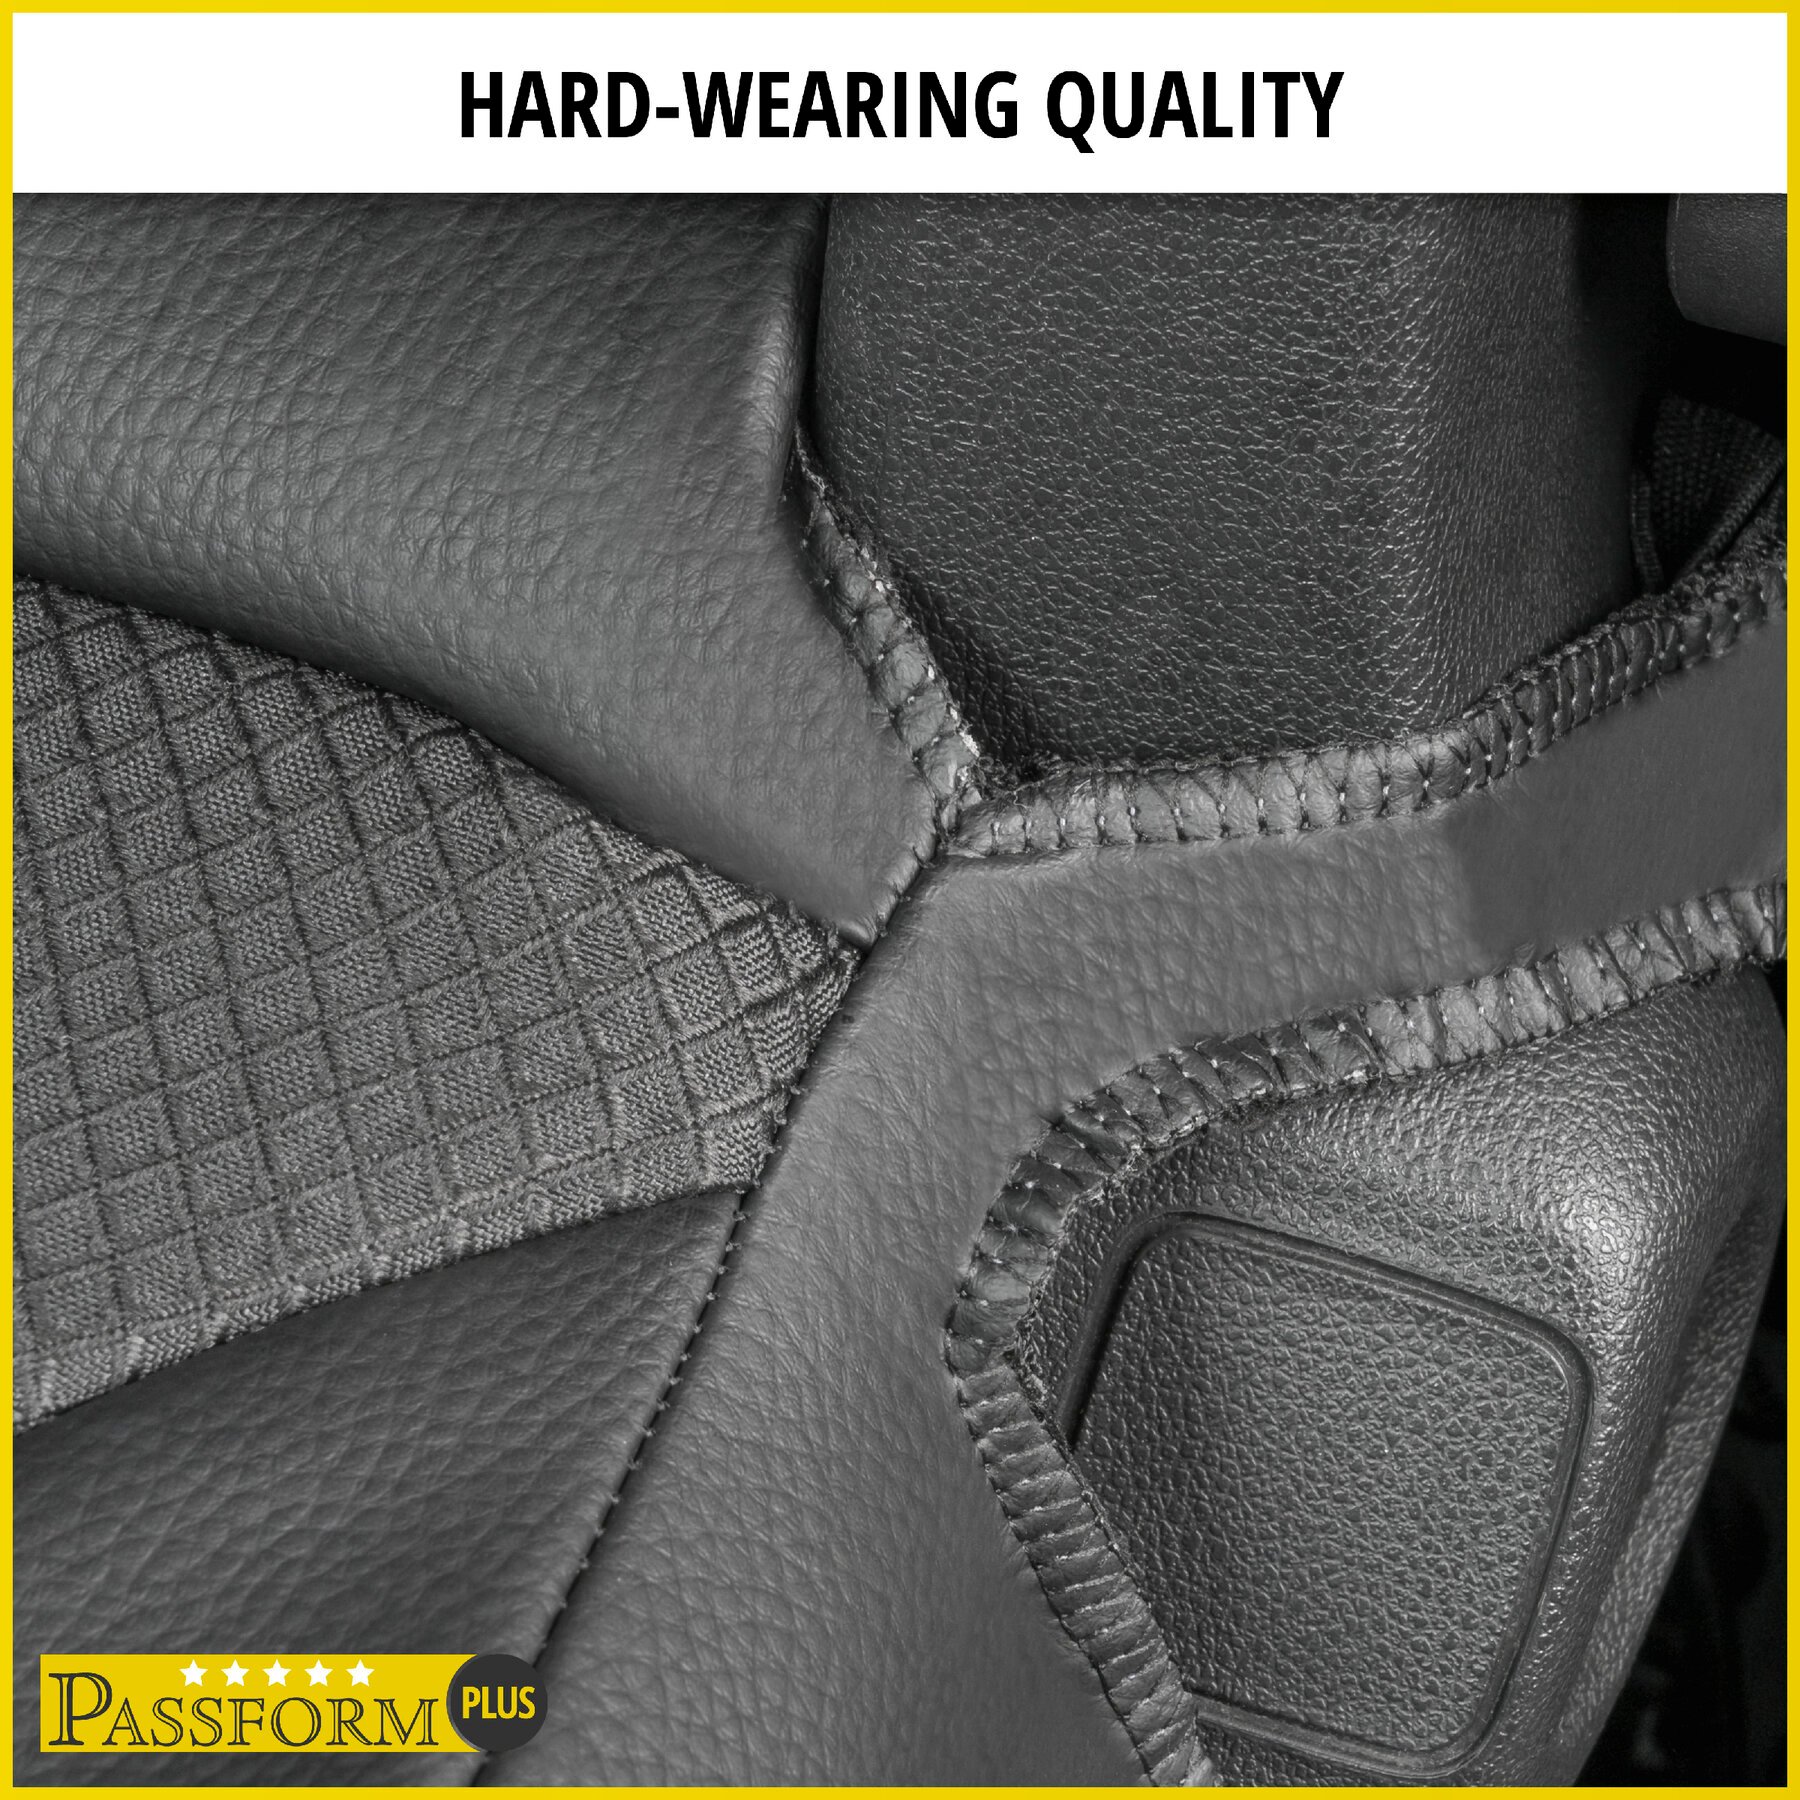 Premium Seat Cover for Renault Master 2010-Today, 1 single seat cover front, 1 double bench coverfoldable